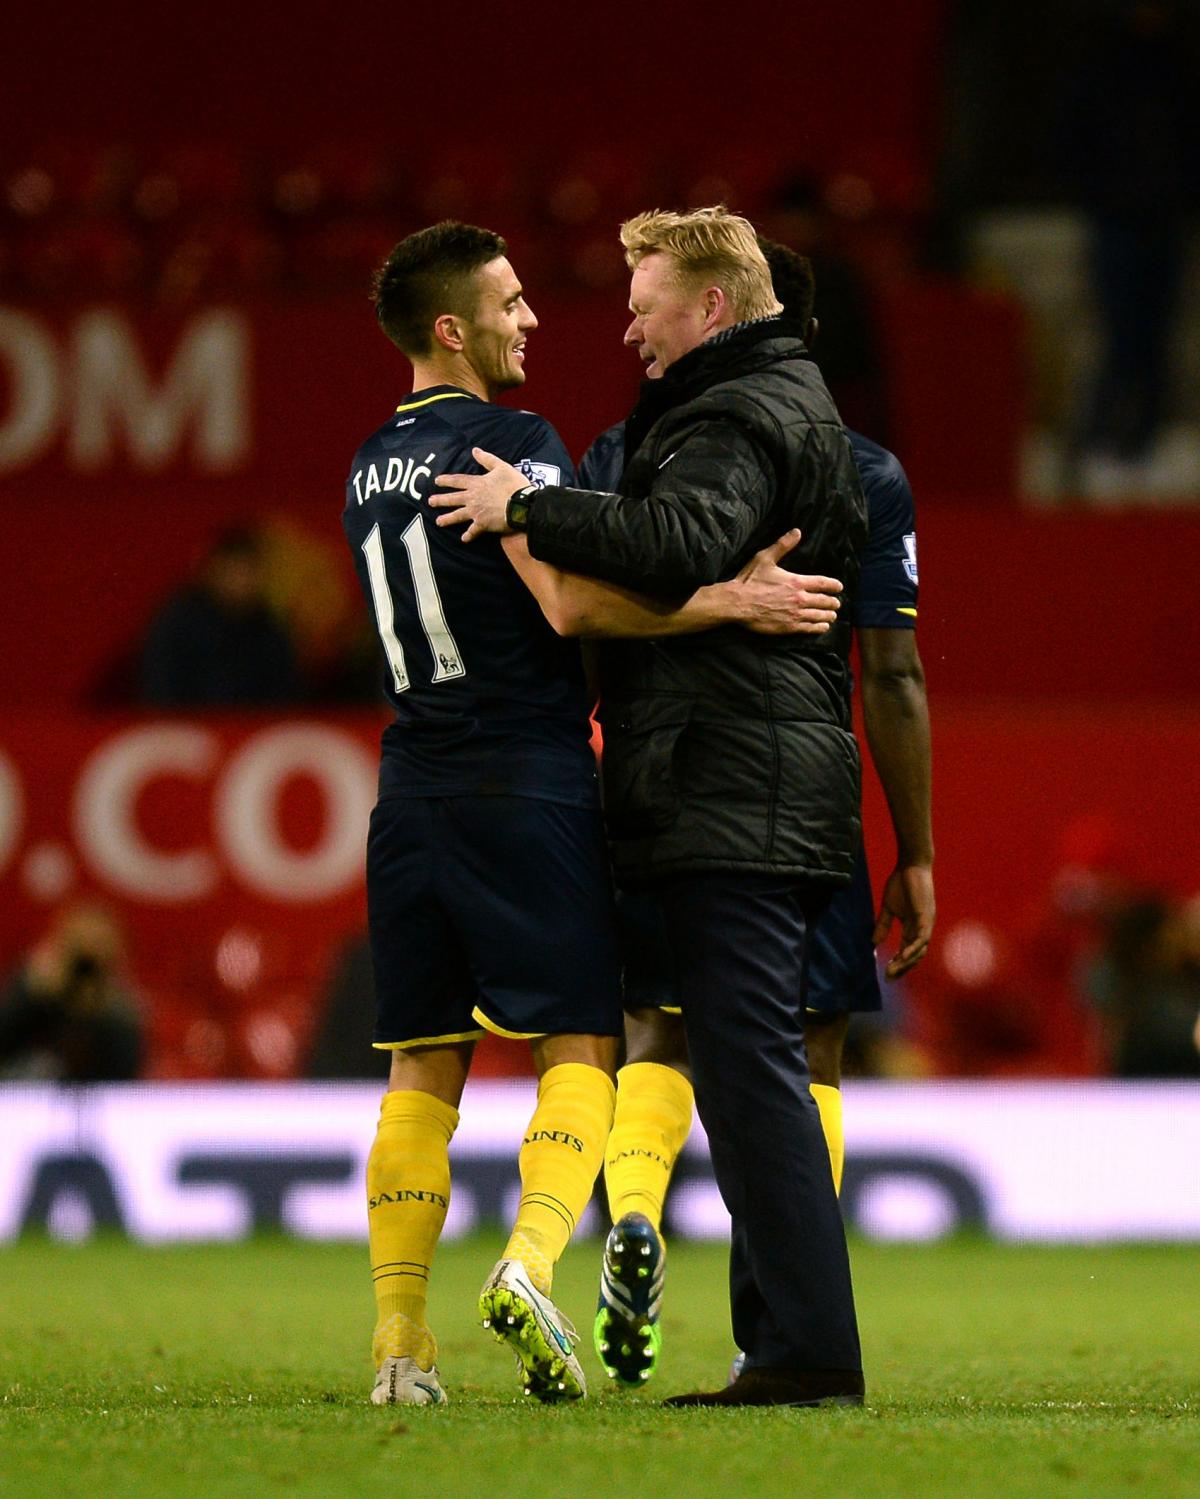 Koeman embraces Dusan Tadic after the midfielder gave them a 1-0 win at Manchester United, in January.